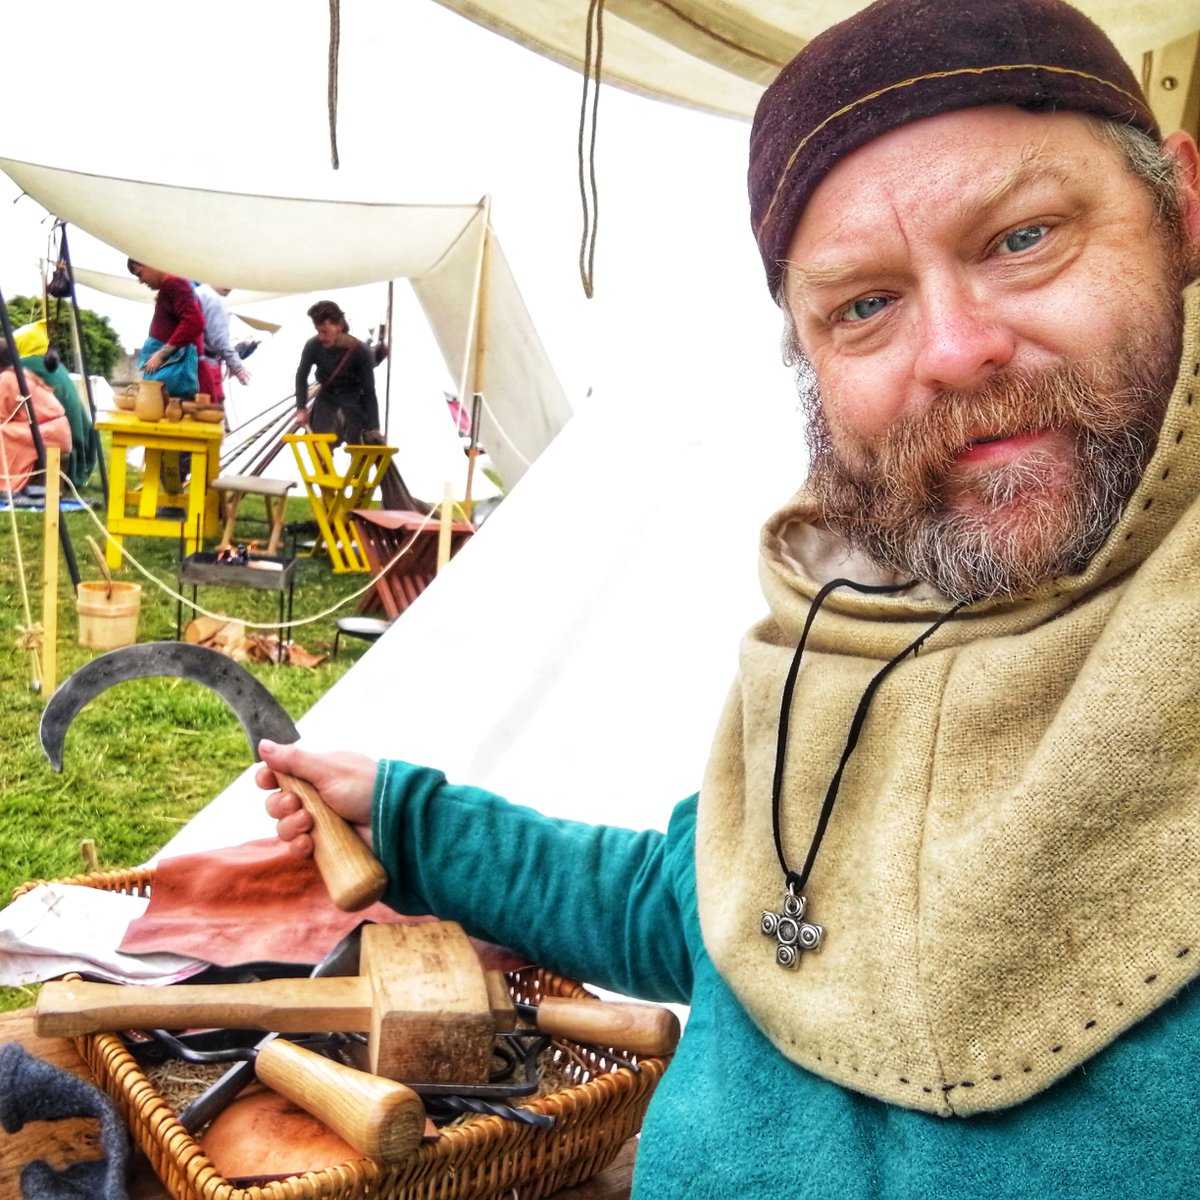 It's time to go back to the thirteenth century for some medical science as I present you historical healthcare and medieval medicine as part of the Medieval Open Day at @WeoleyCastleR with @UPANATEMHISTORY on Saturday 1st July - my most local show! birminghammuseums.org.uk/events/medieva…